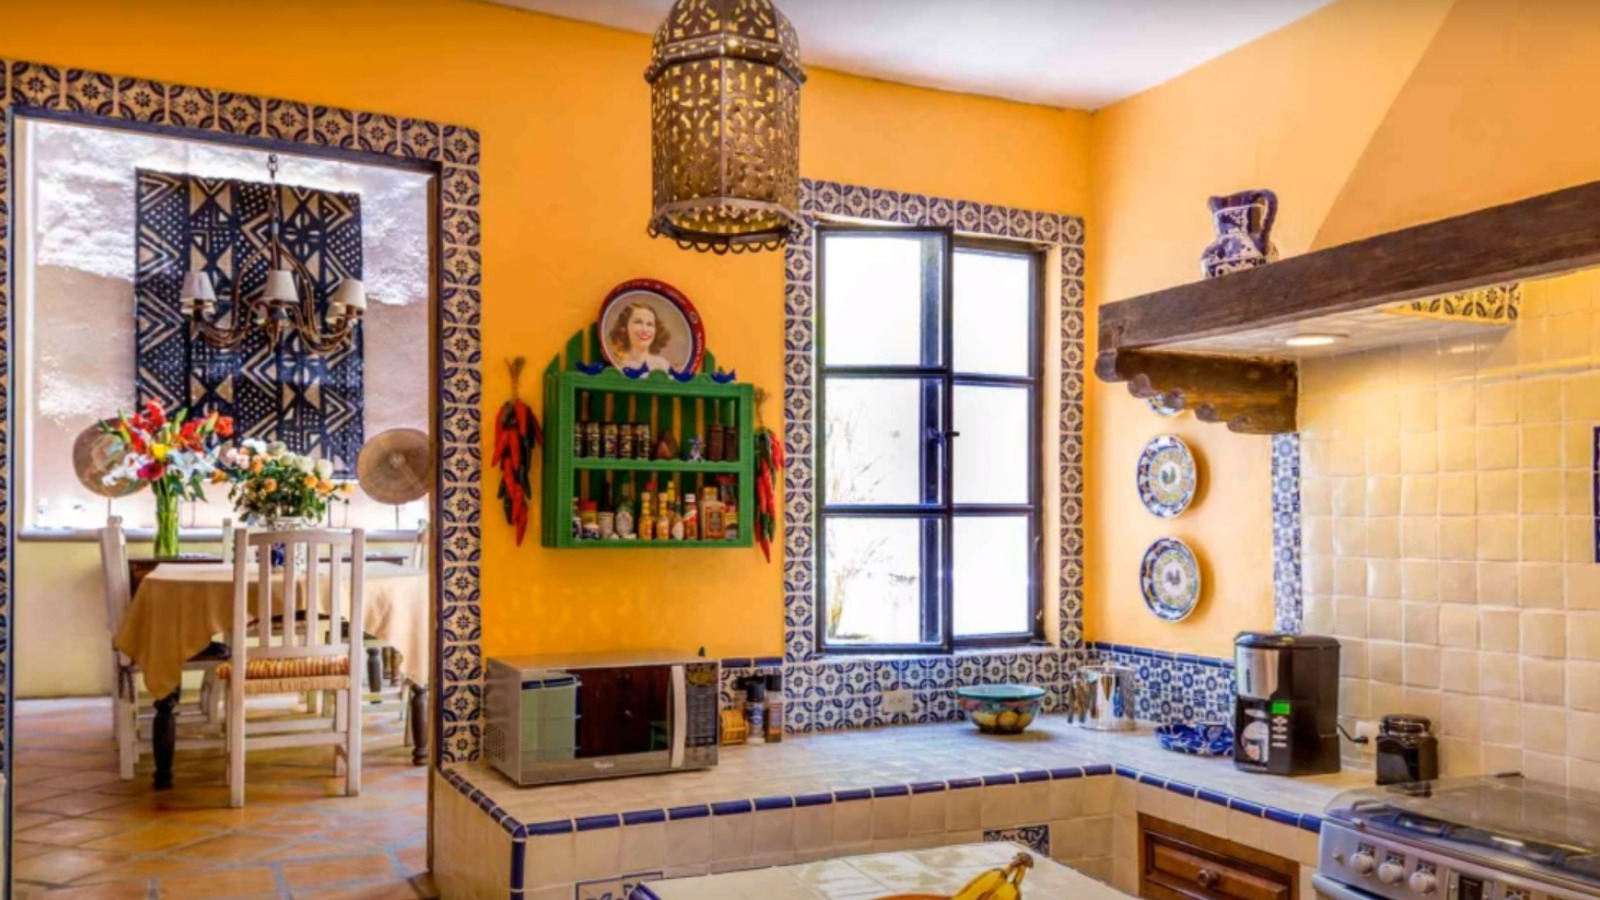 https://www.housedigest.com/img/gallery/how-to-decorate-a-spanish-style-kitchen/l-intro-1665248714.jpg